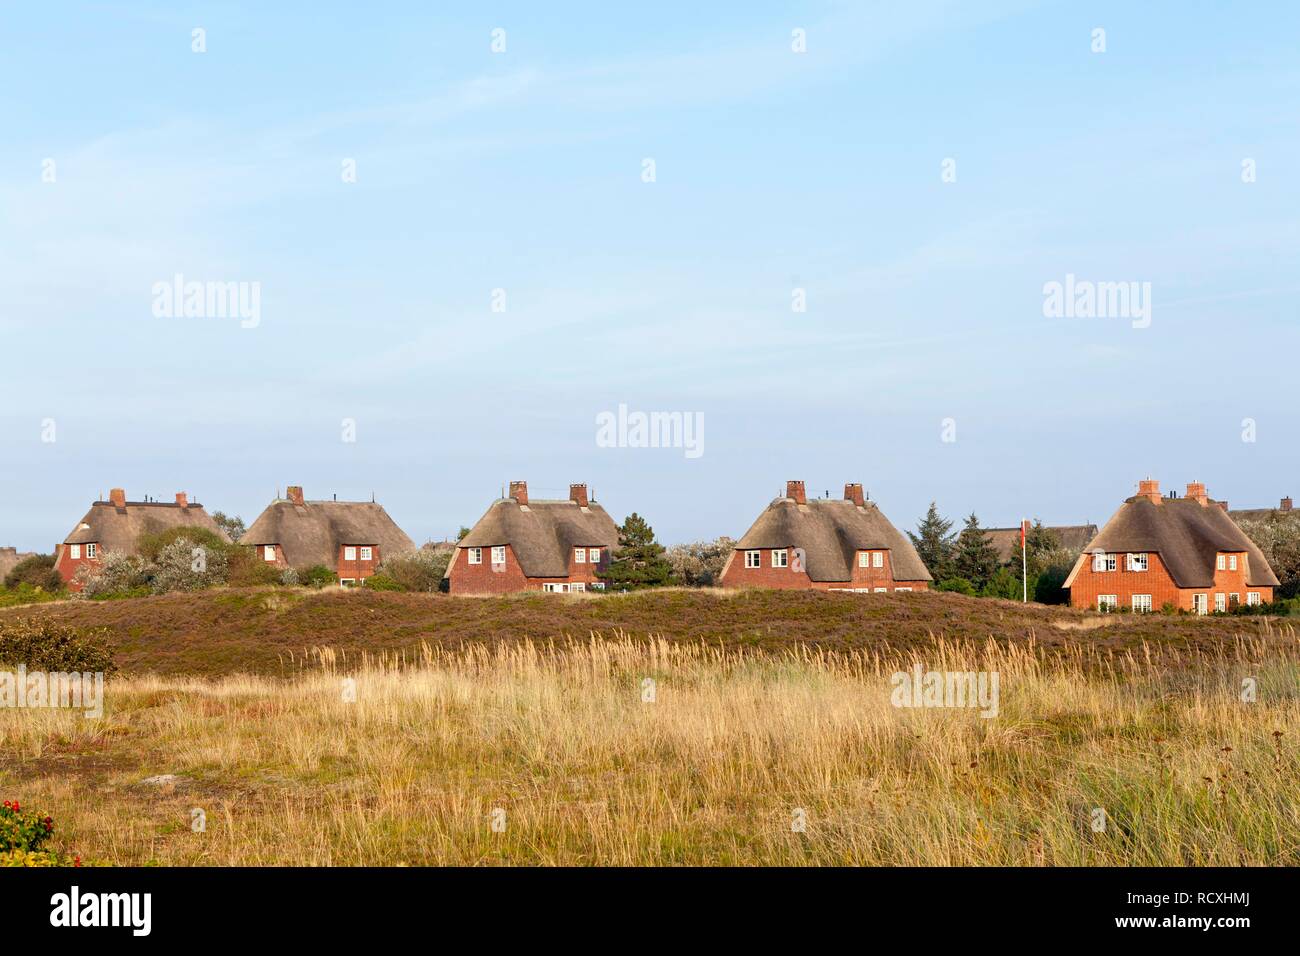 Thatched-roof houses, List, Sylt island, Schleswig-Holstein, PublicGround Stock Photo